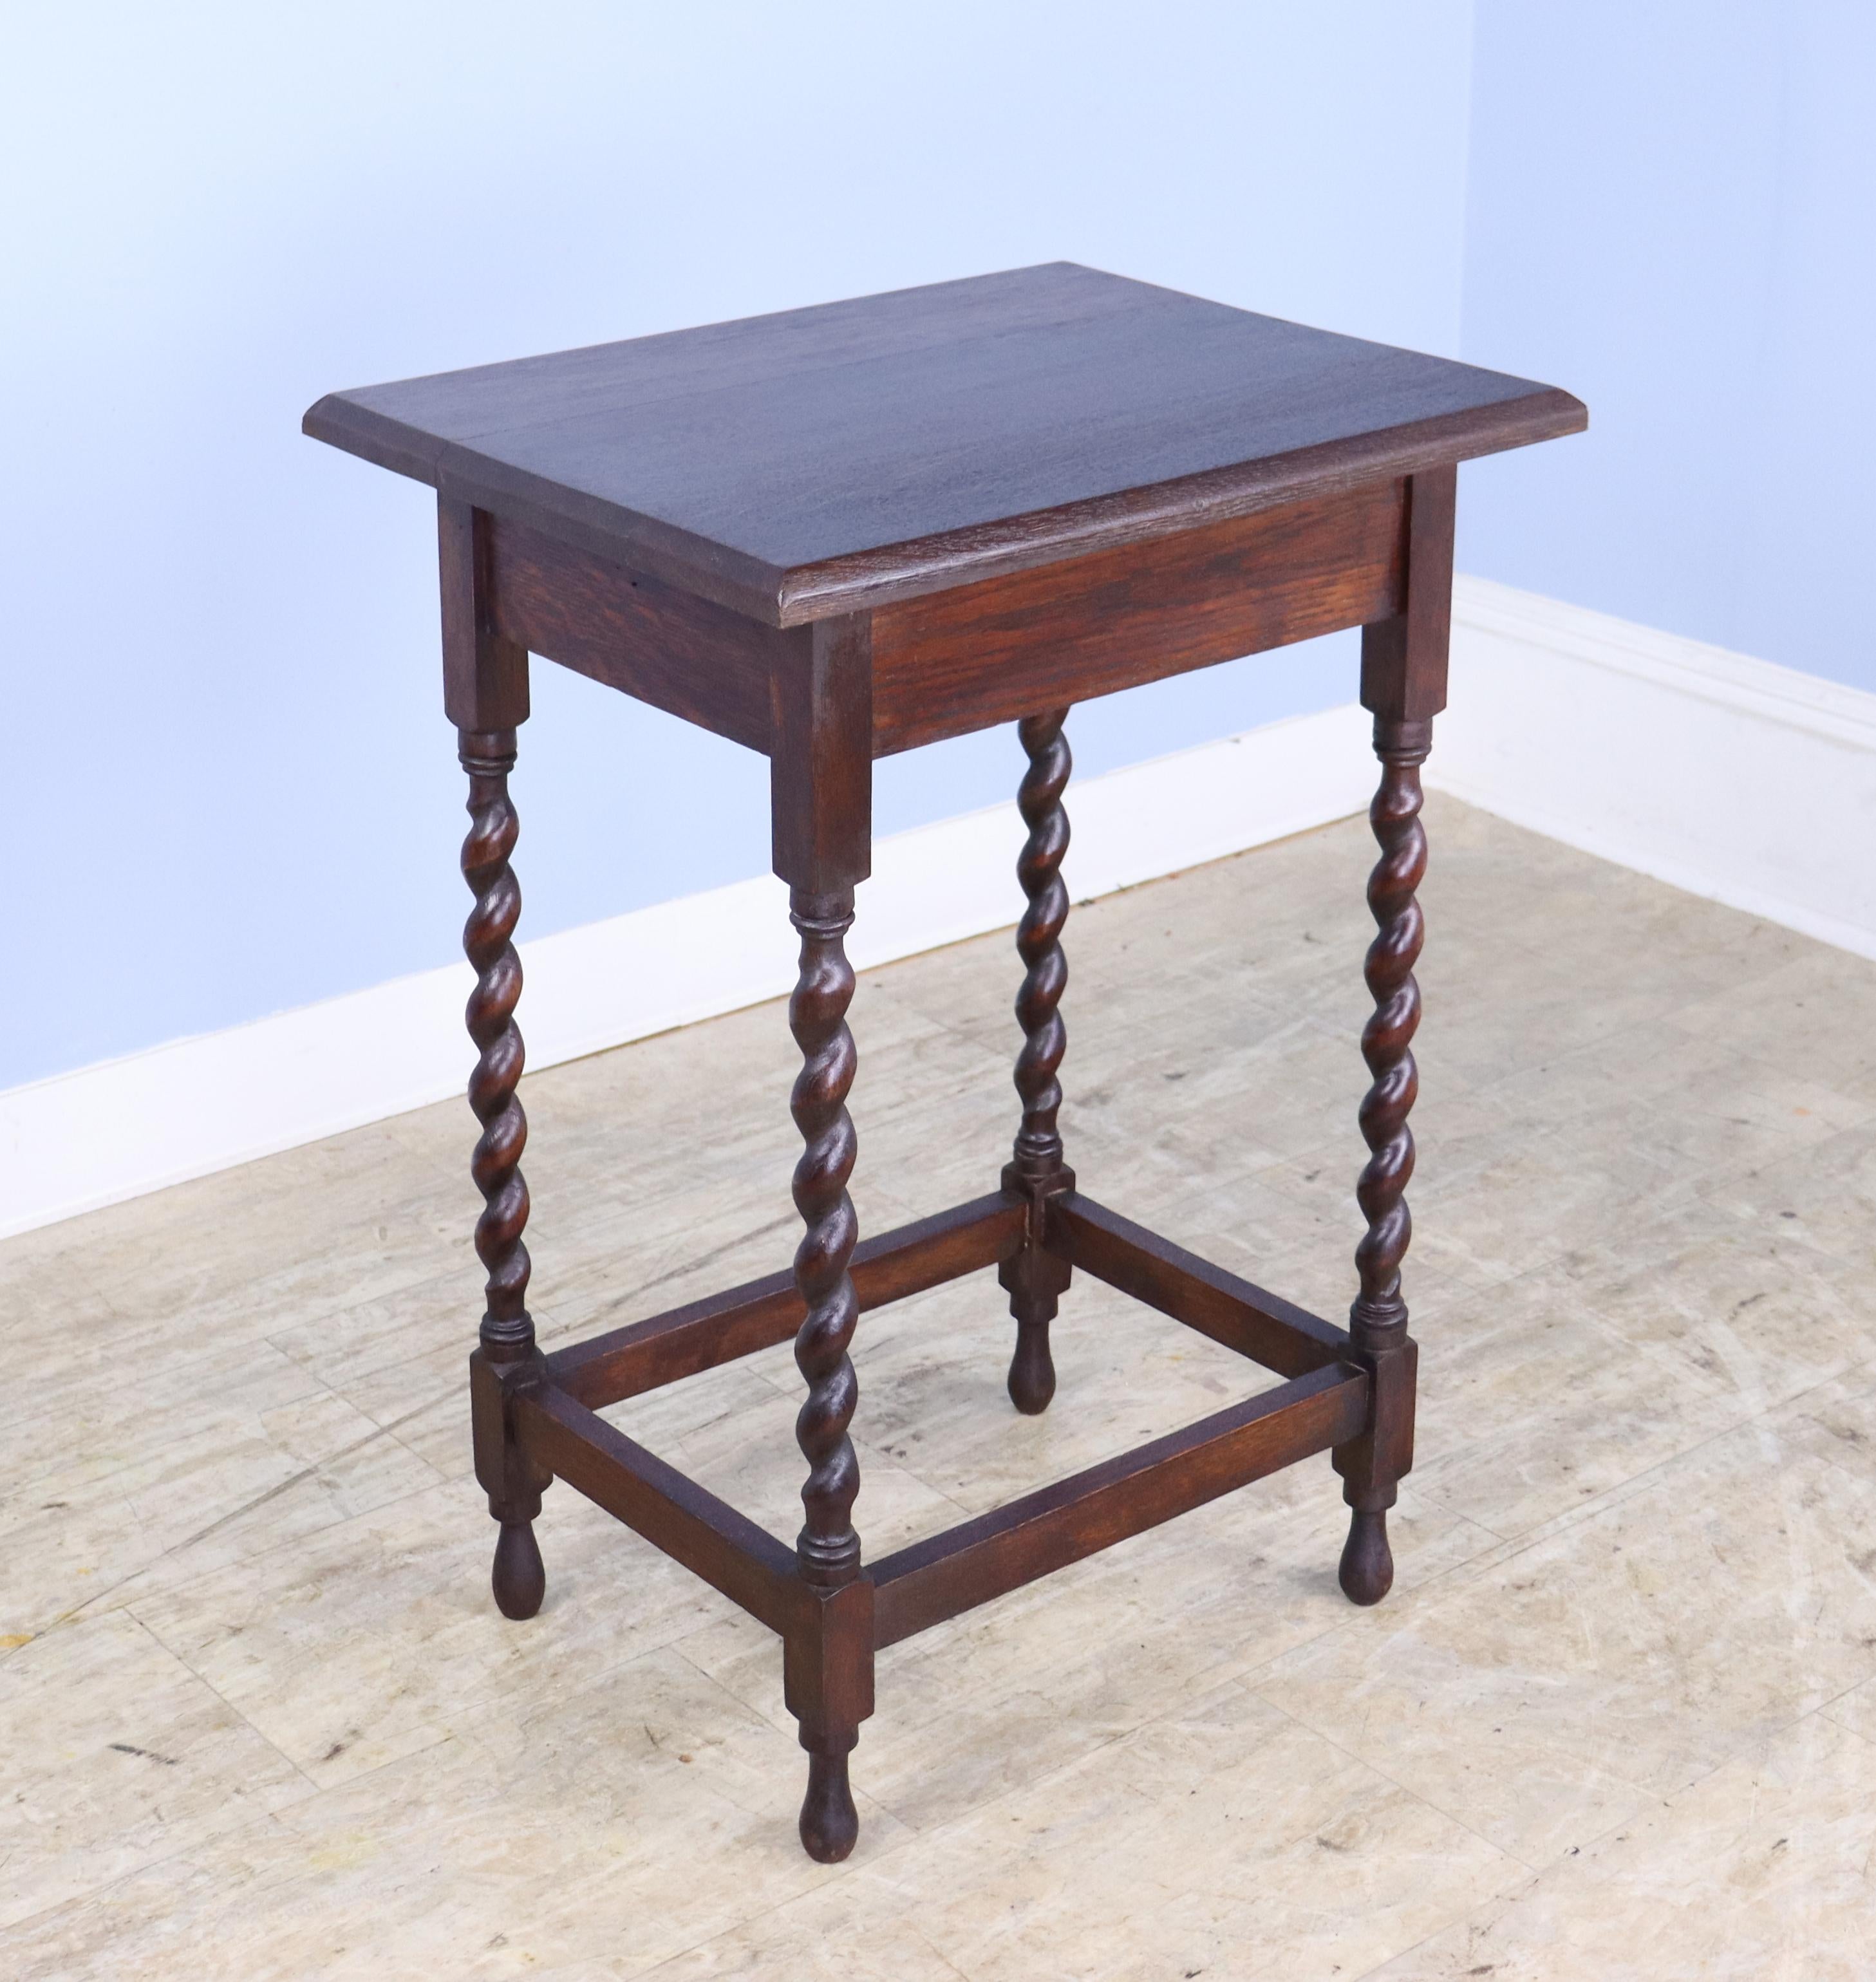 A charming simple occasional table in dark oak with eye-catching barley twist detail. Would also make a nice lamp table, and would pair well on either side of a sofa or guest bed with our other barley twist side table, reference #0623-M82A.